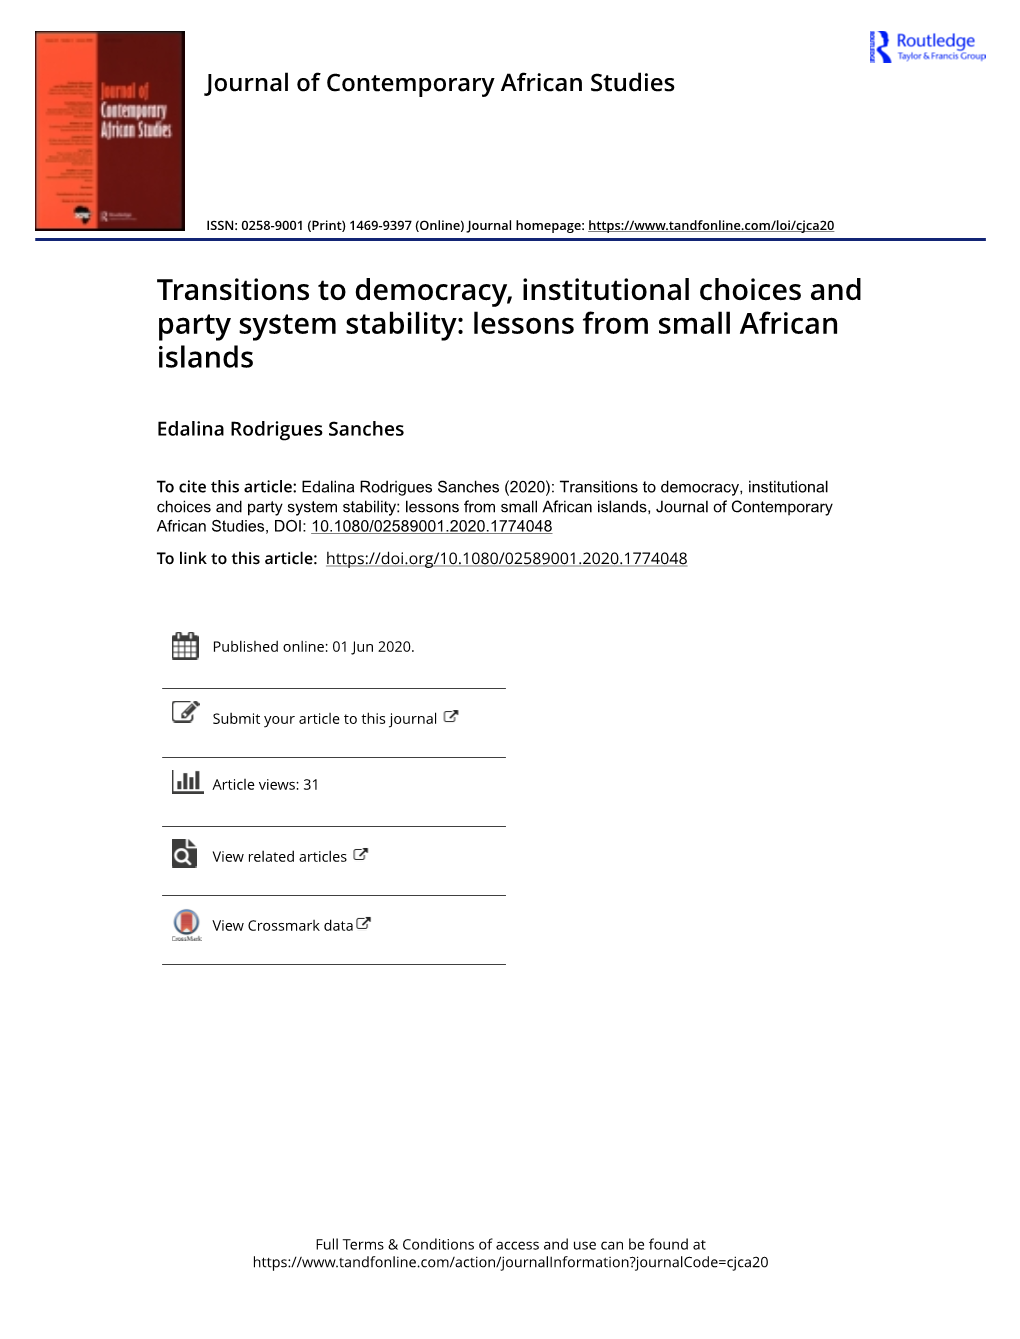 Transitions to Democracy, Institutional Choices and Party System Stability: Lessons from Small African Islands